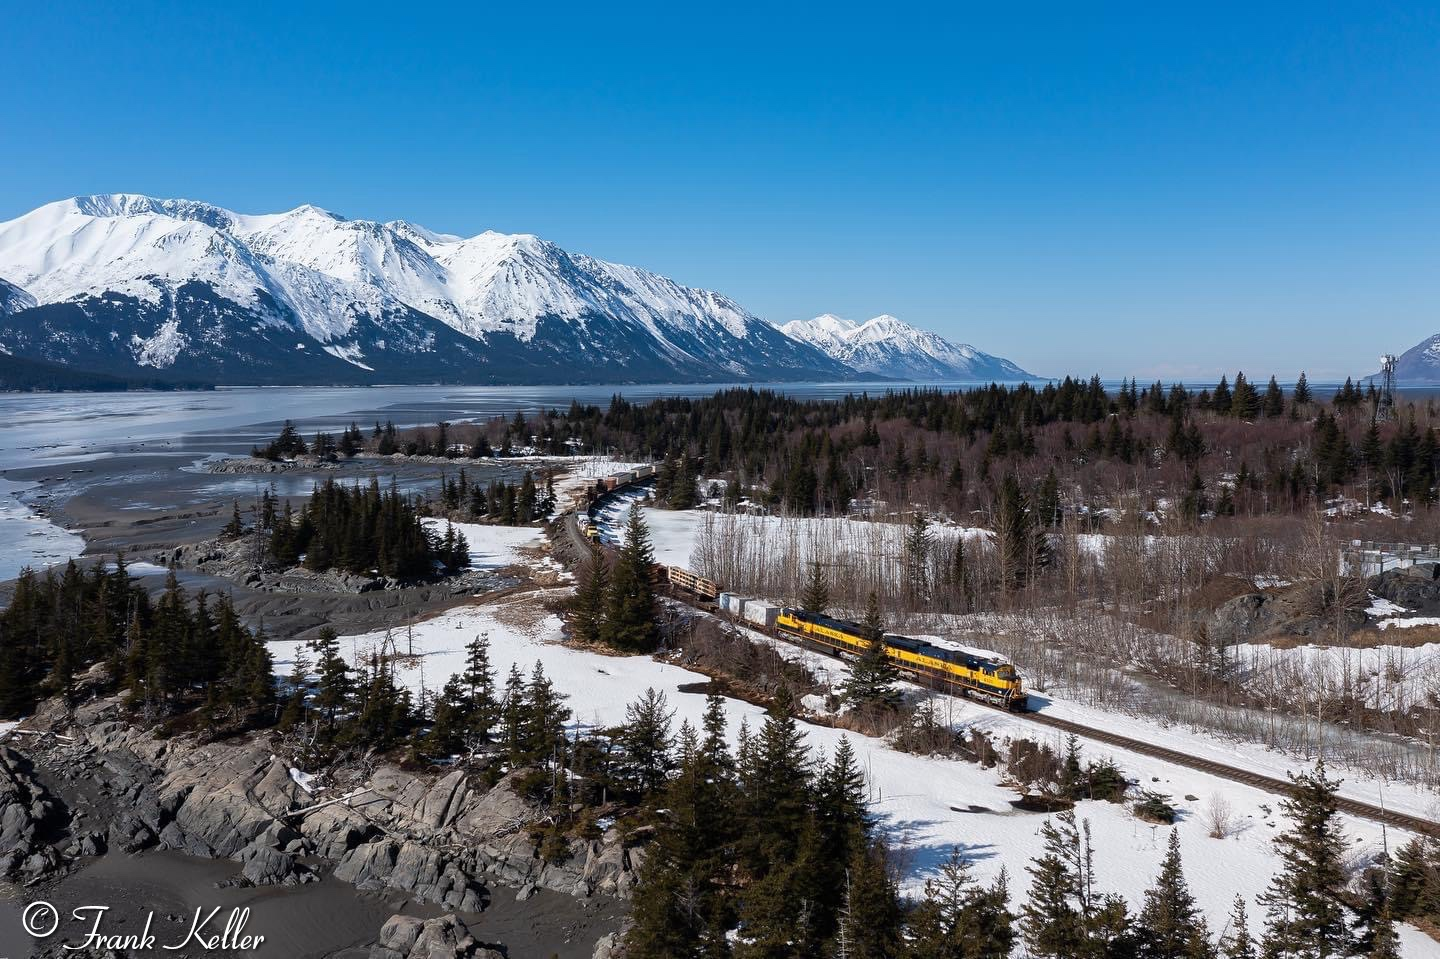 My southbound chase of the Seward freight. I would get lucky and managed to follow a train back north. Seen here rolling through the sweeping curve at Bird Point.